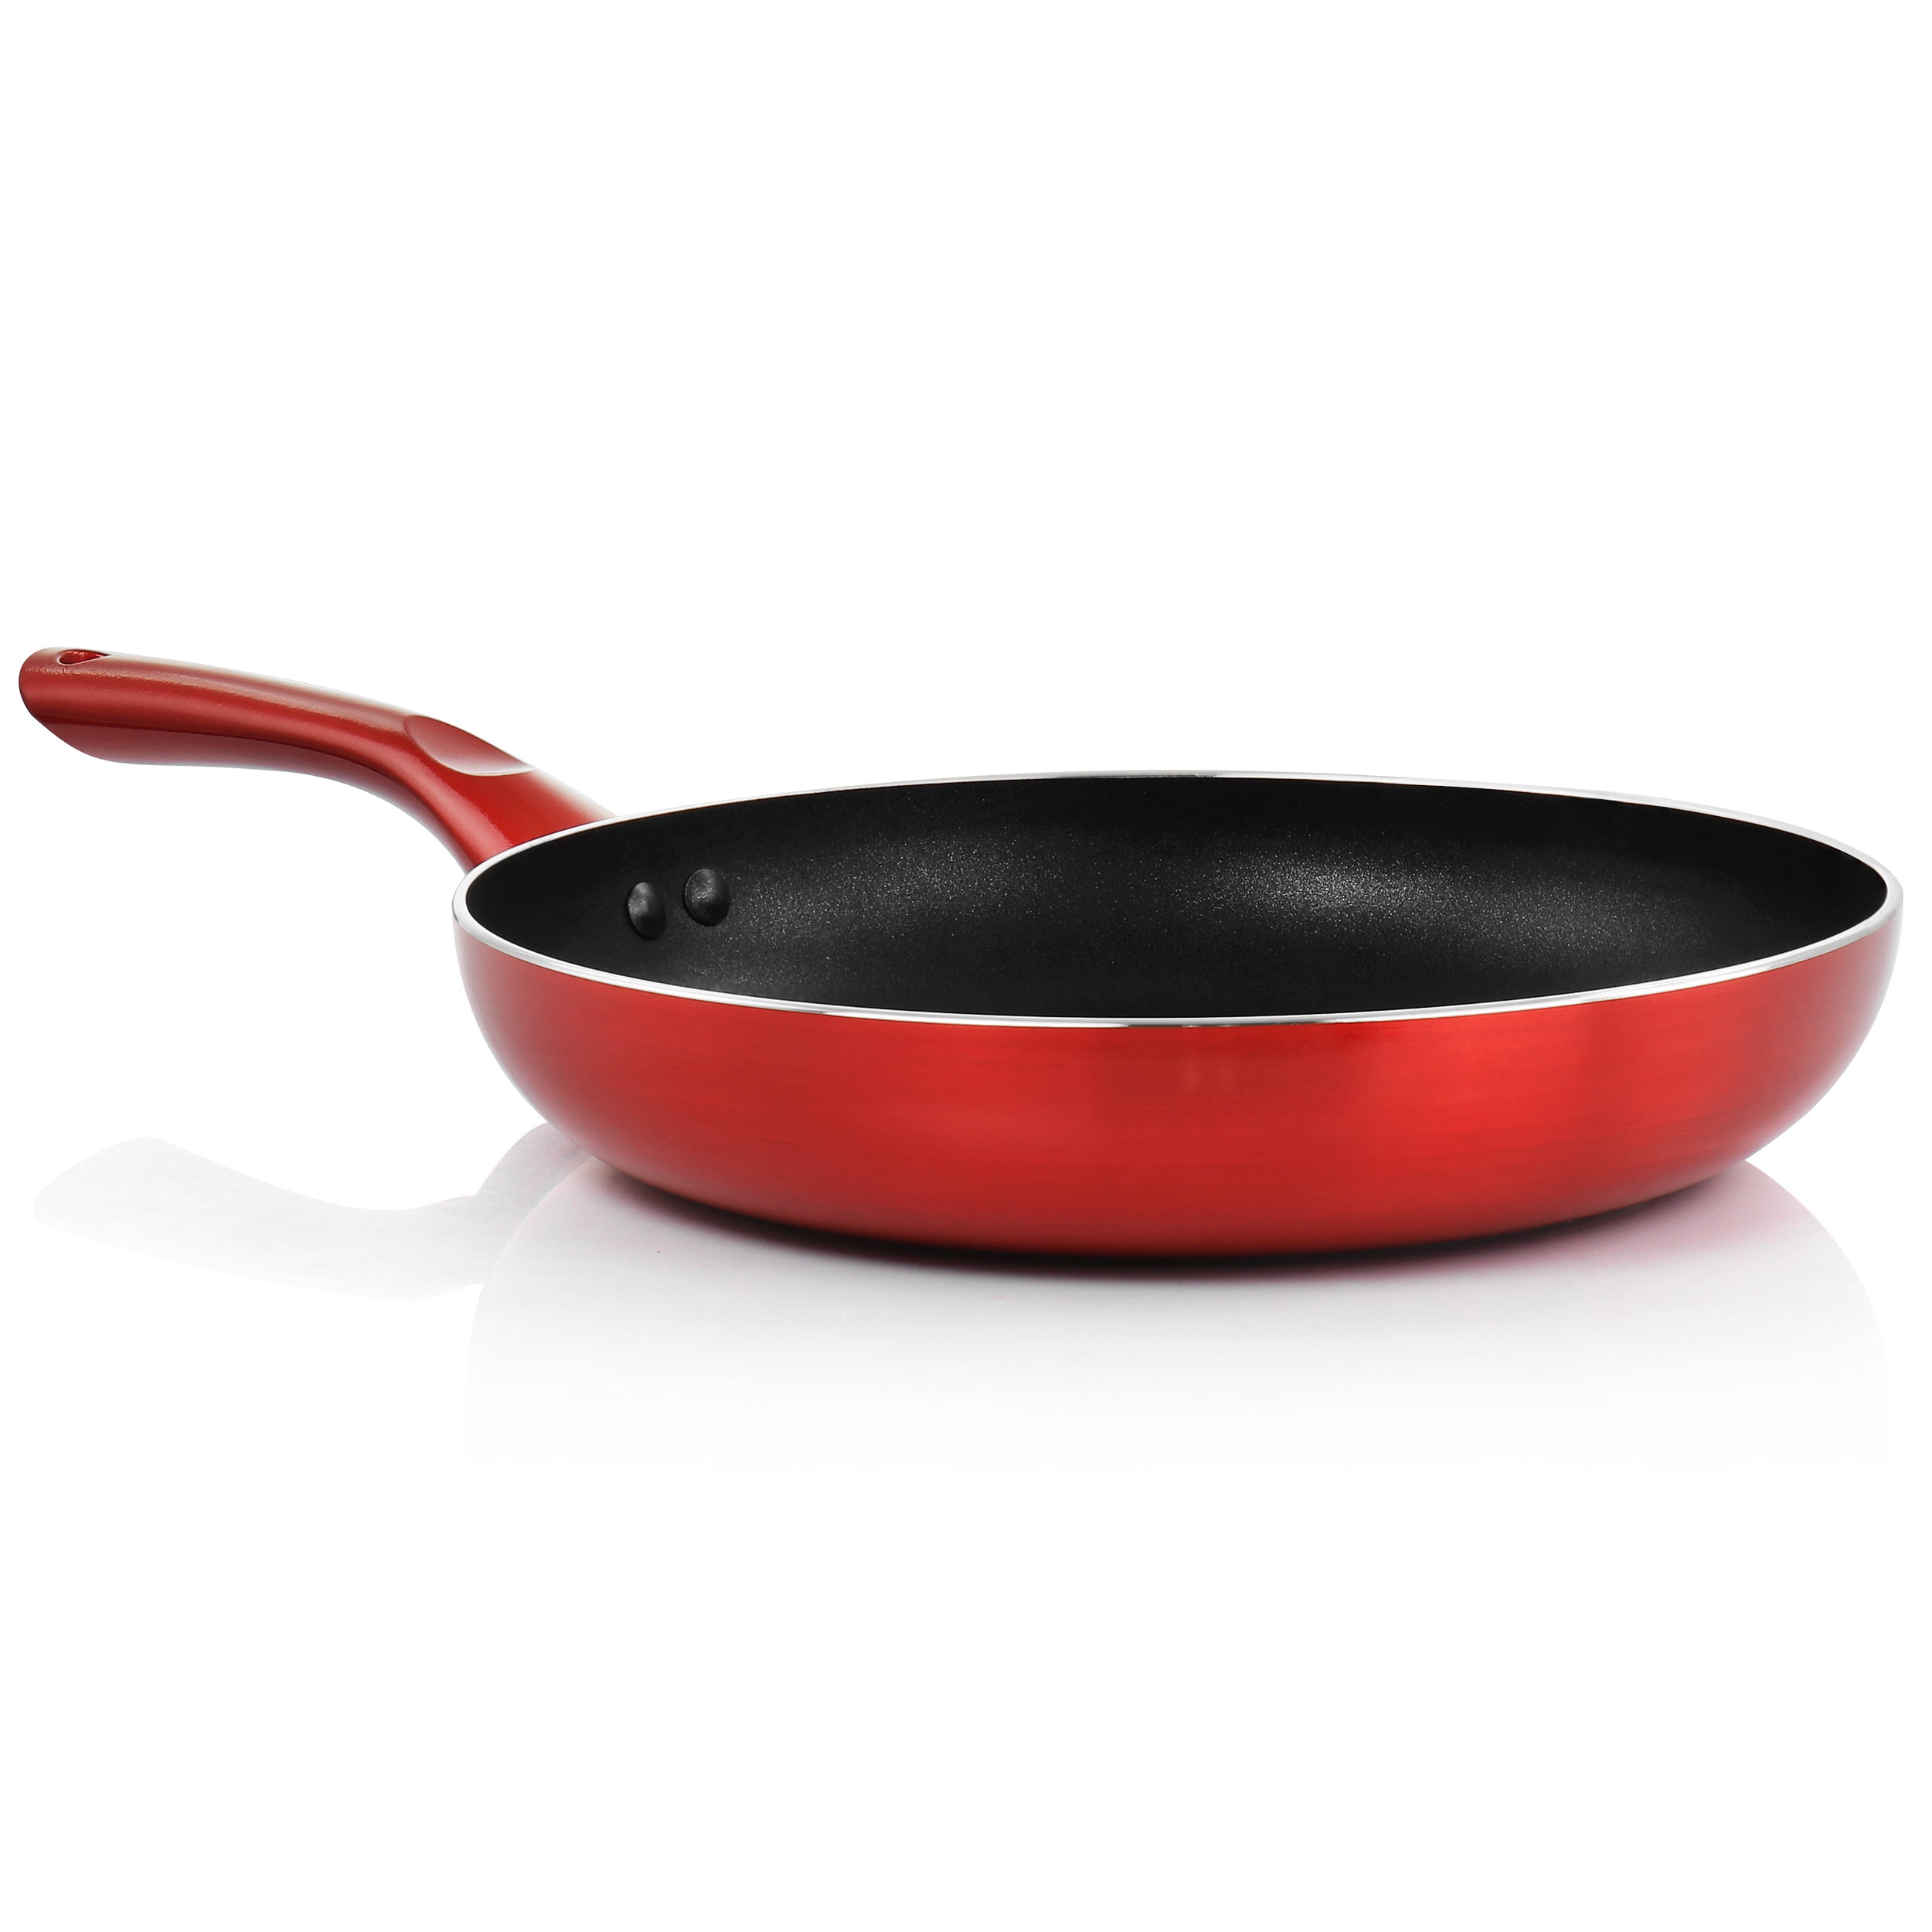 Oster 8 inch and 10 inch Nonstick Frying Pan Set in Speckled Red